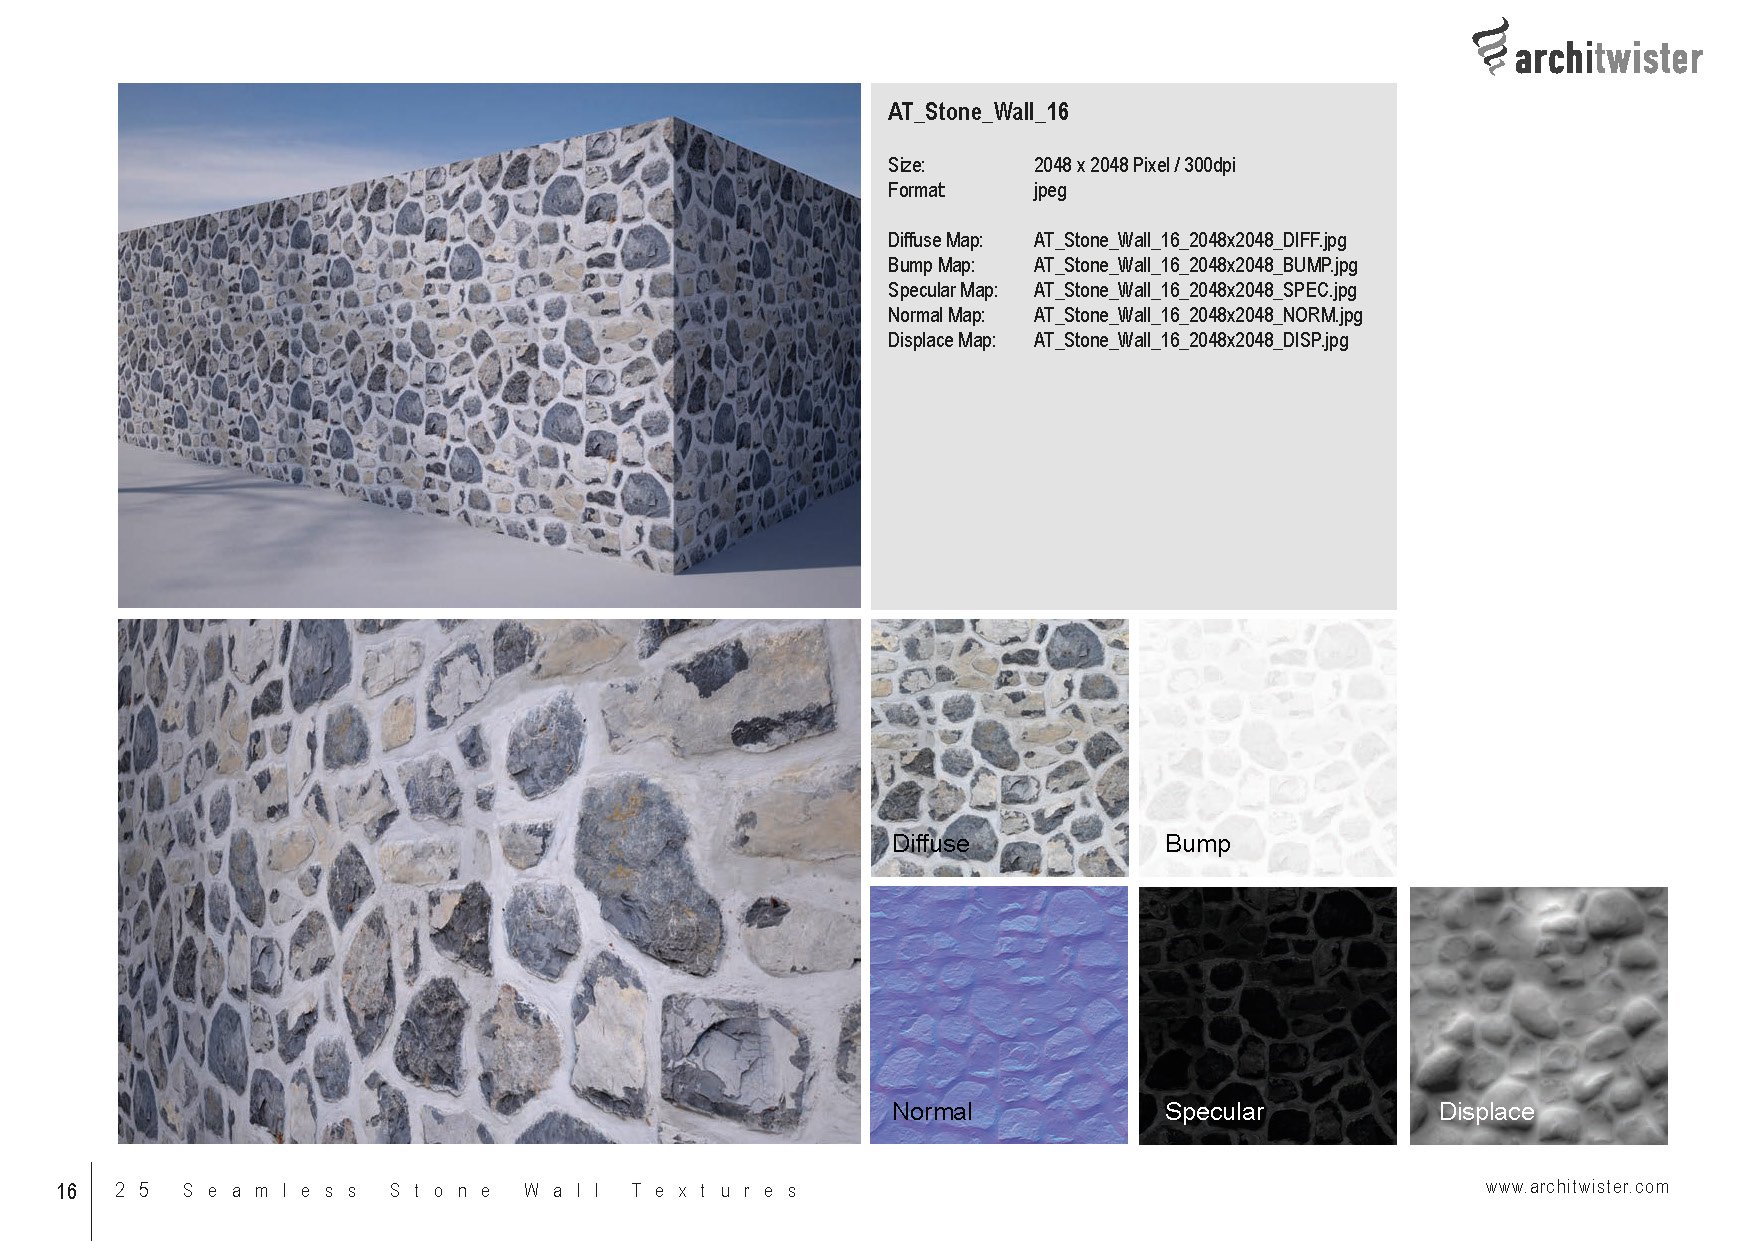 at stone wall textures catalog 01 seite 17 185